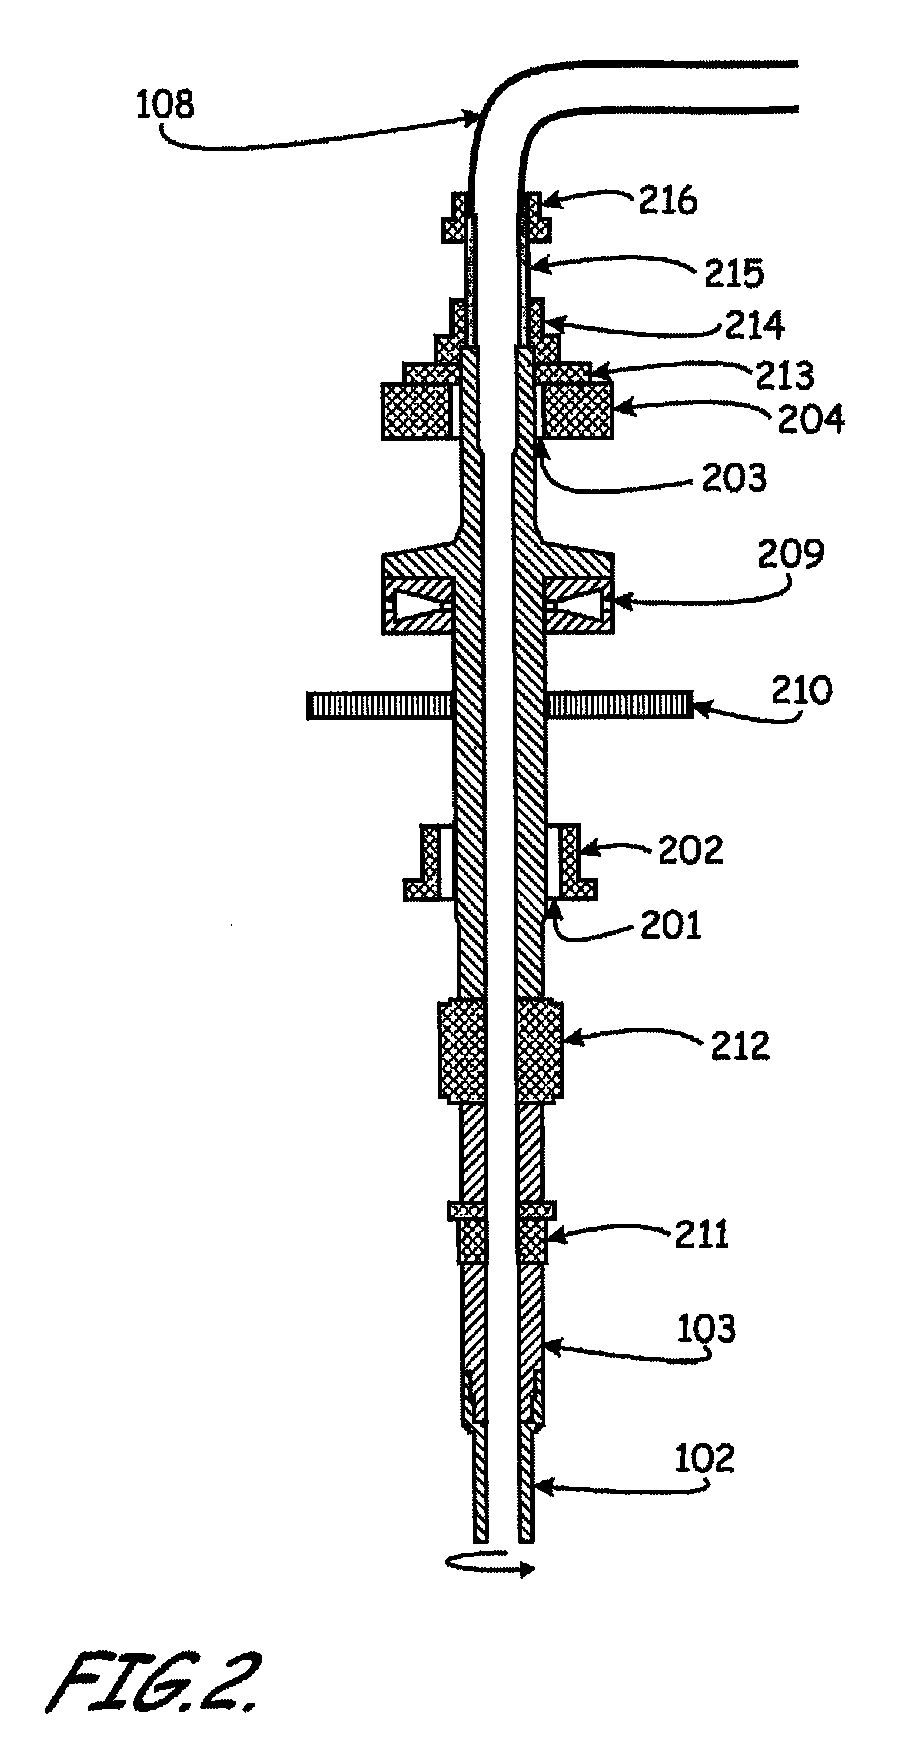 Apparatus for evaluating rock properties while drilling using drilling rig-mounted acoustic sensors